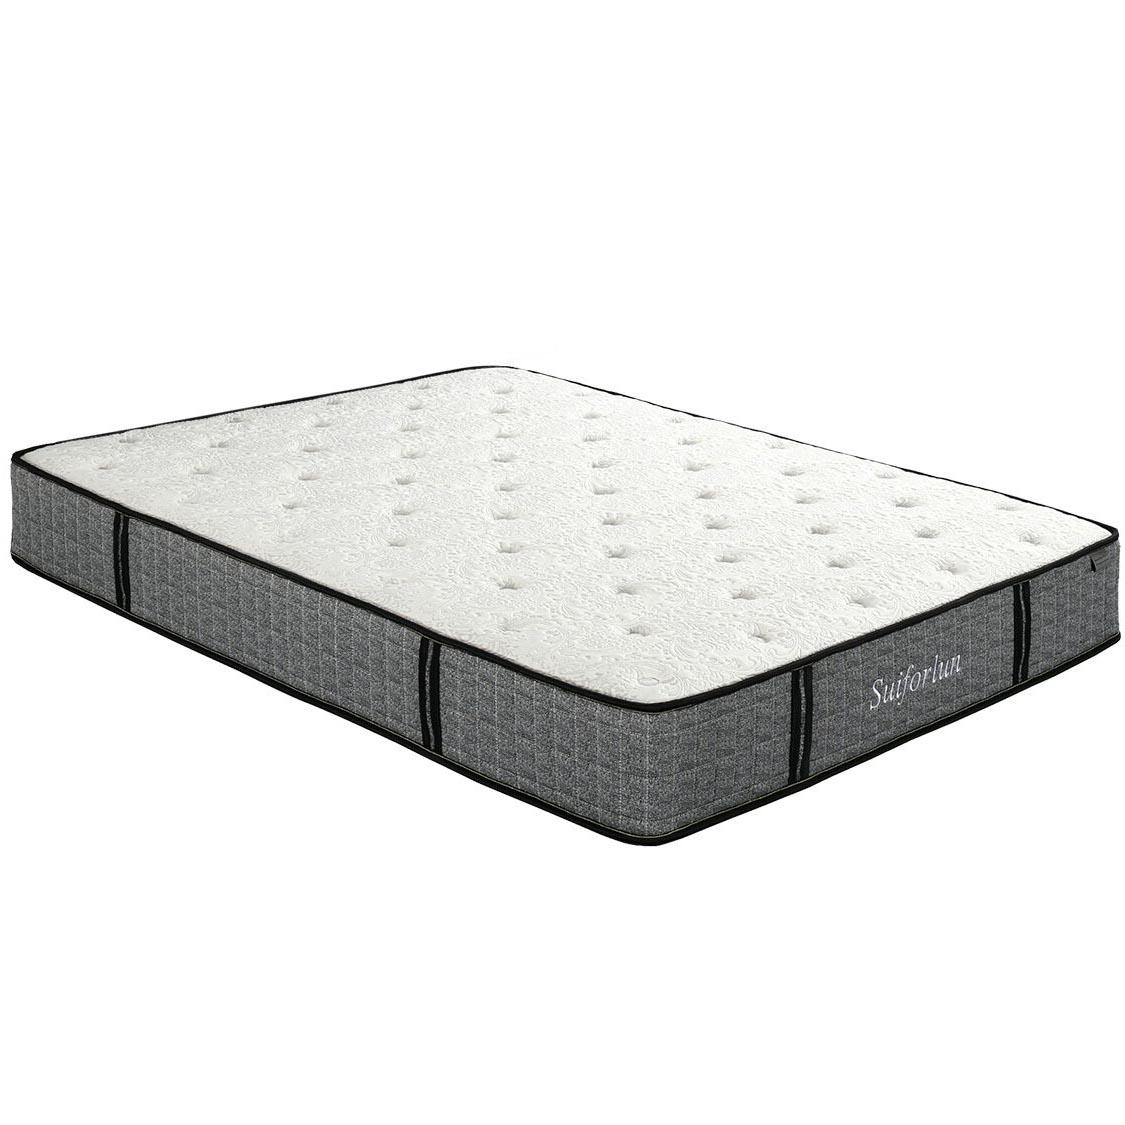 Suiforlun mattress coils innerspring hybrid bed wholesale for home-2